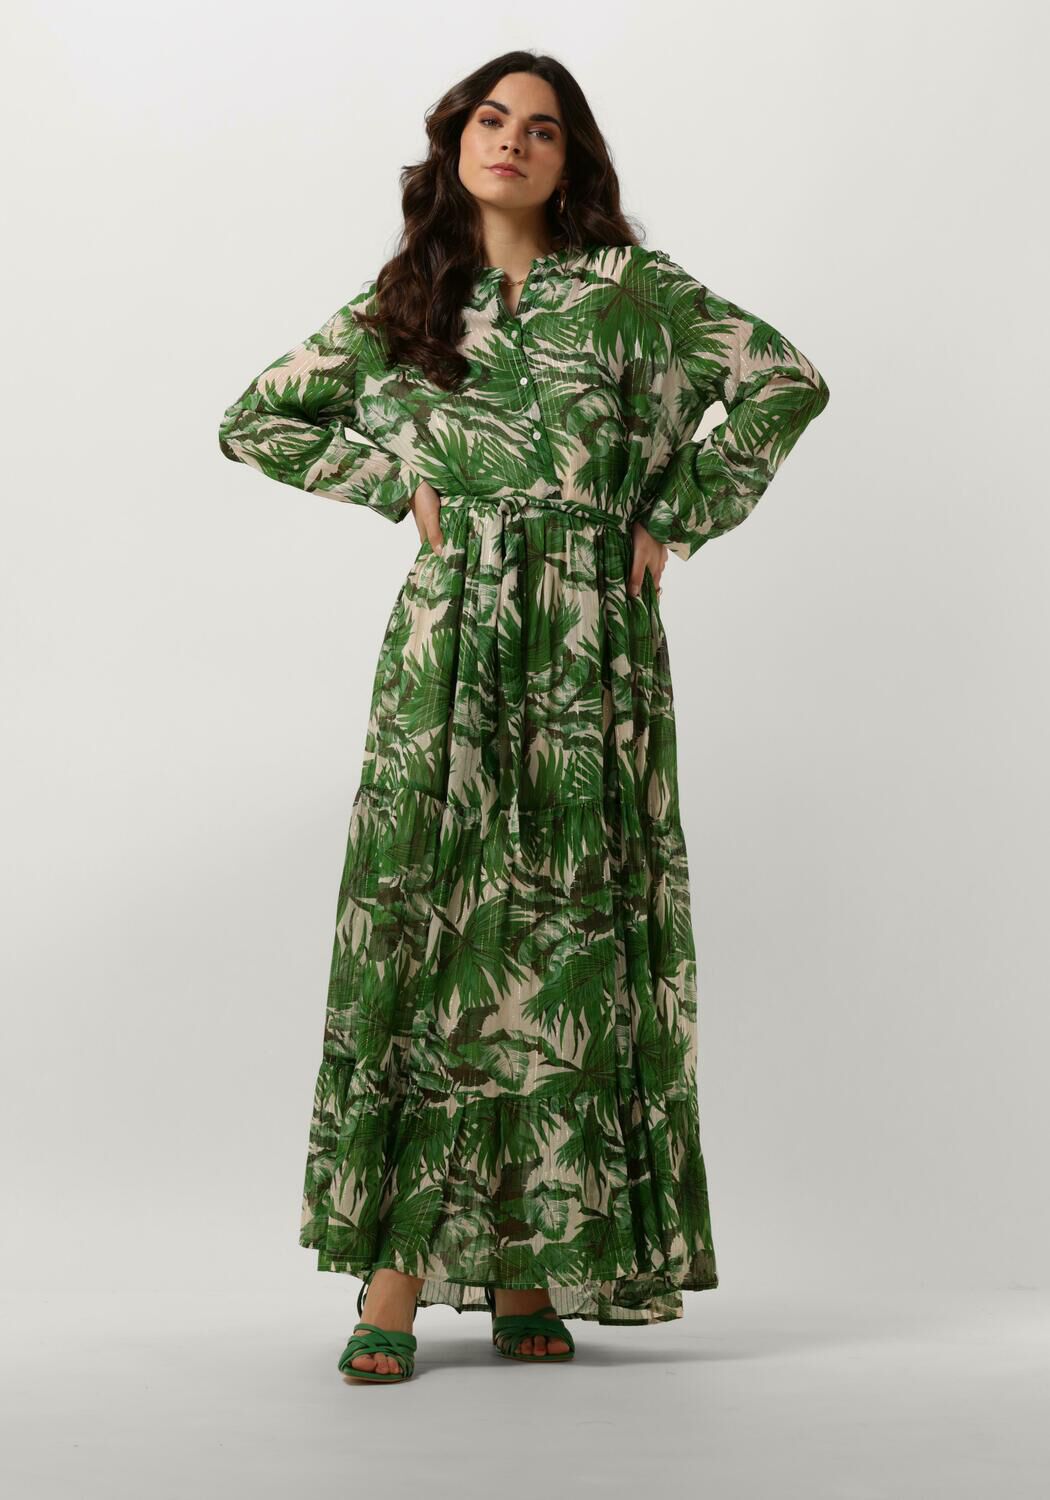 Lollys Laundry Groene Maxi Jurk met Ruchedetails Multicolor Dames